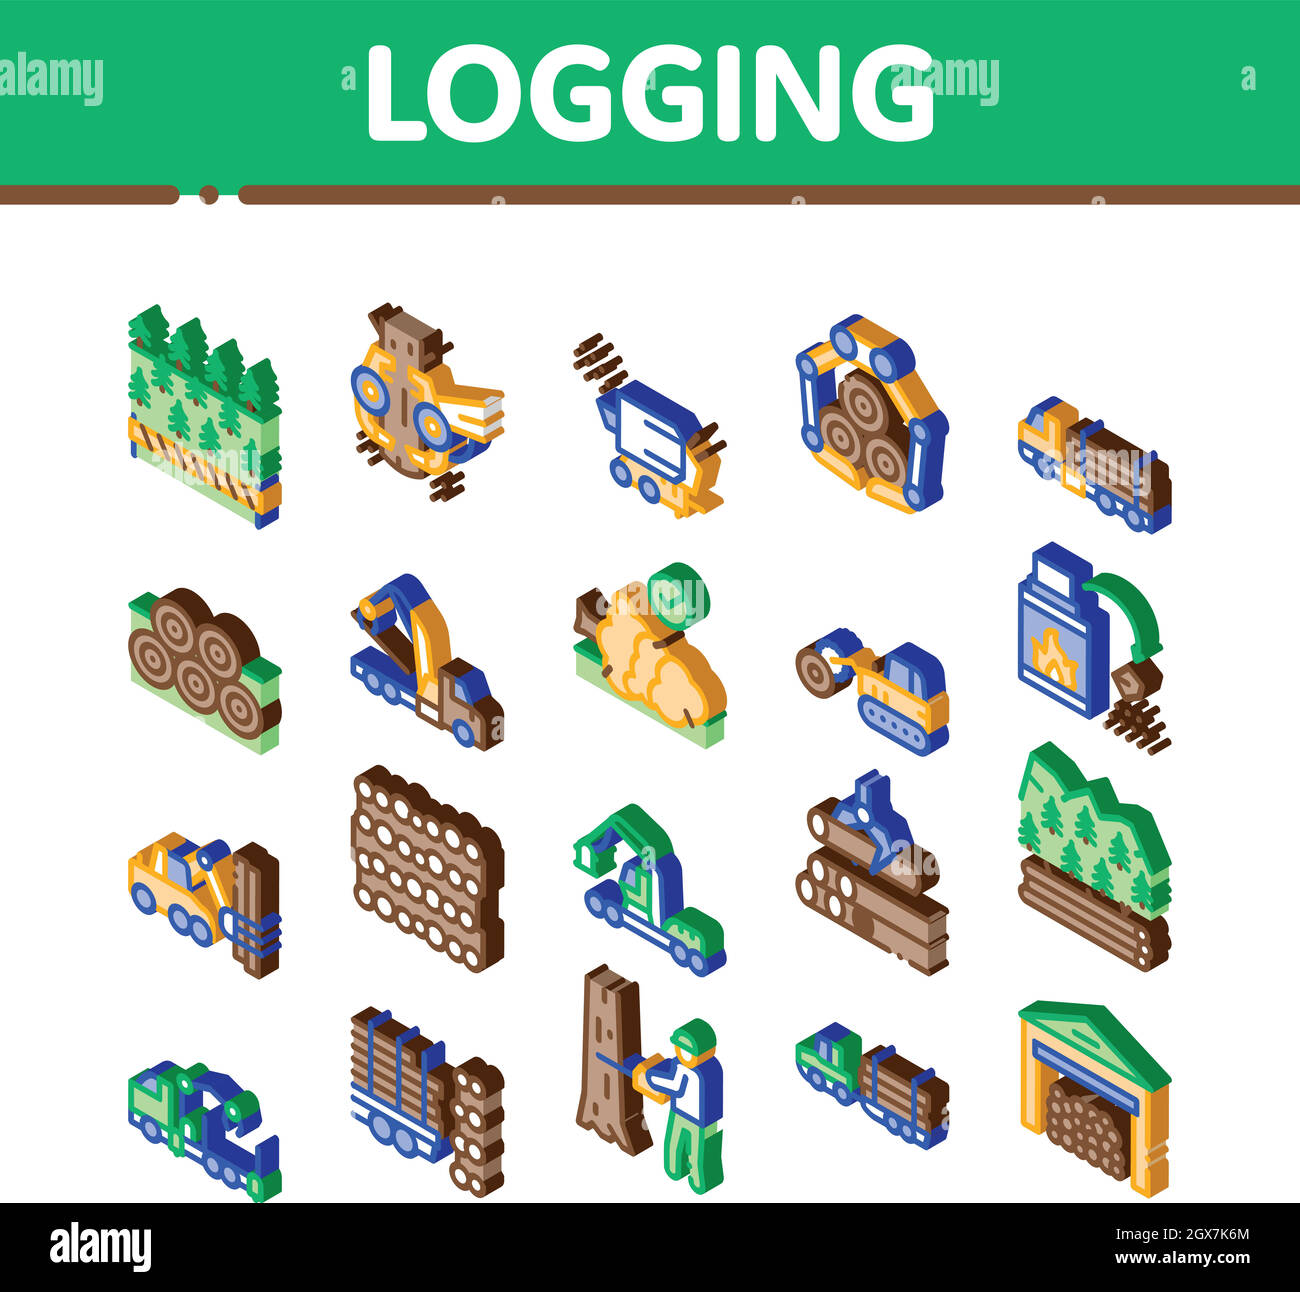 Wood Logging Industry Isometric Icons Set Vector Stock Vector